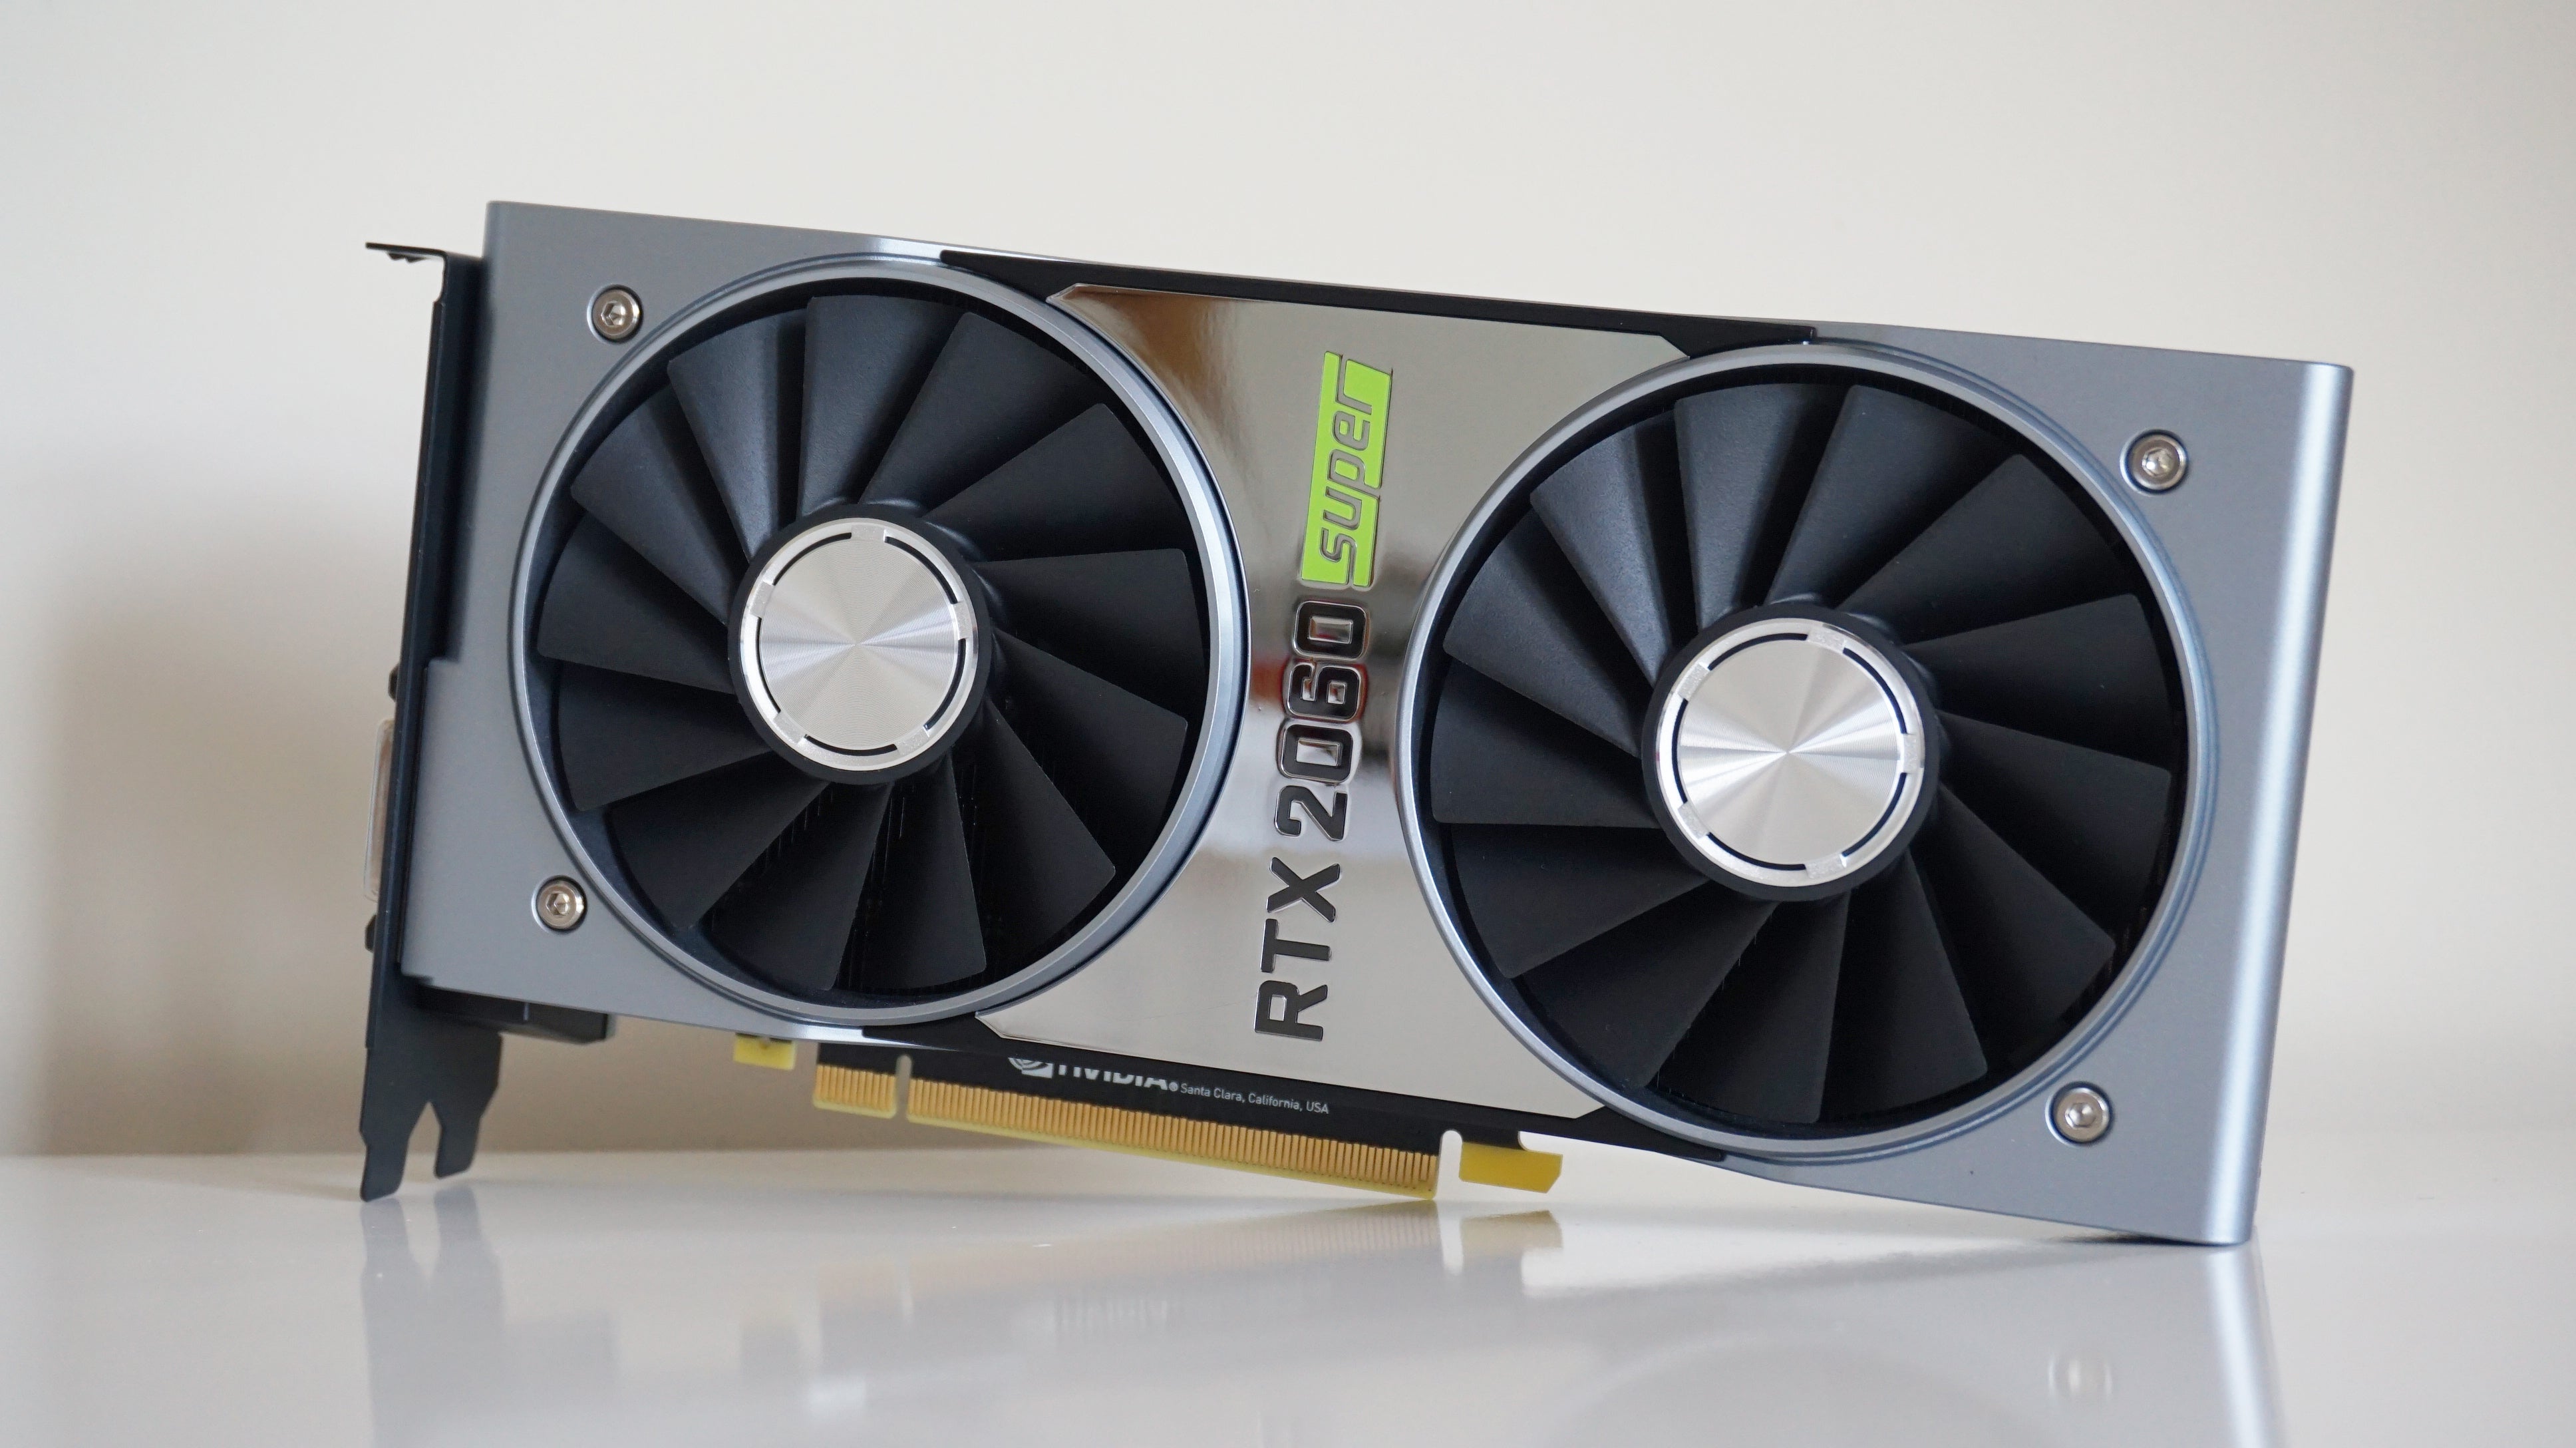 Nvidia GeForce RTX 2060 Super review: RTX 2070 power on the